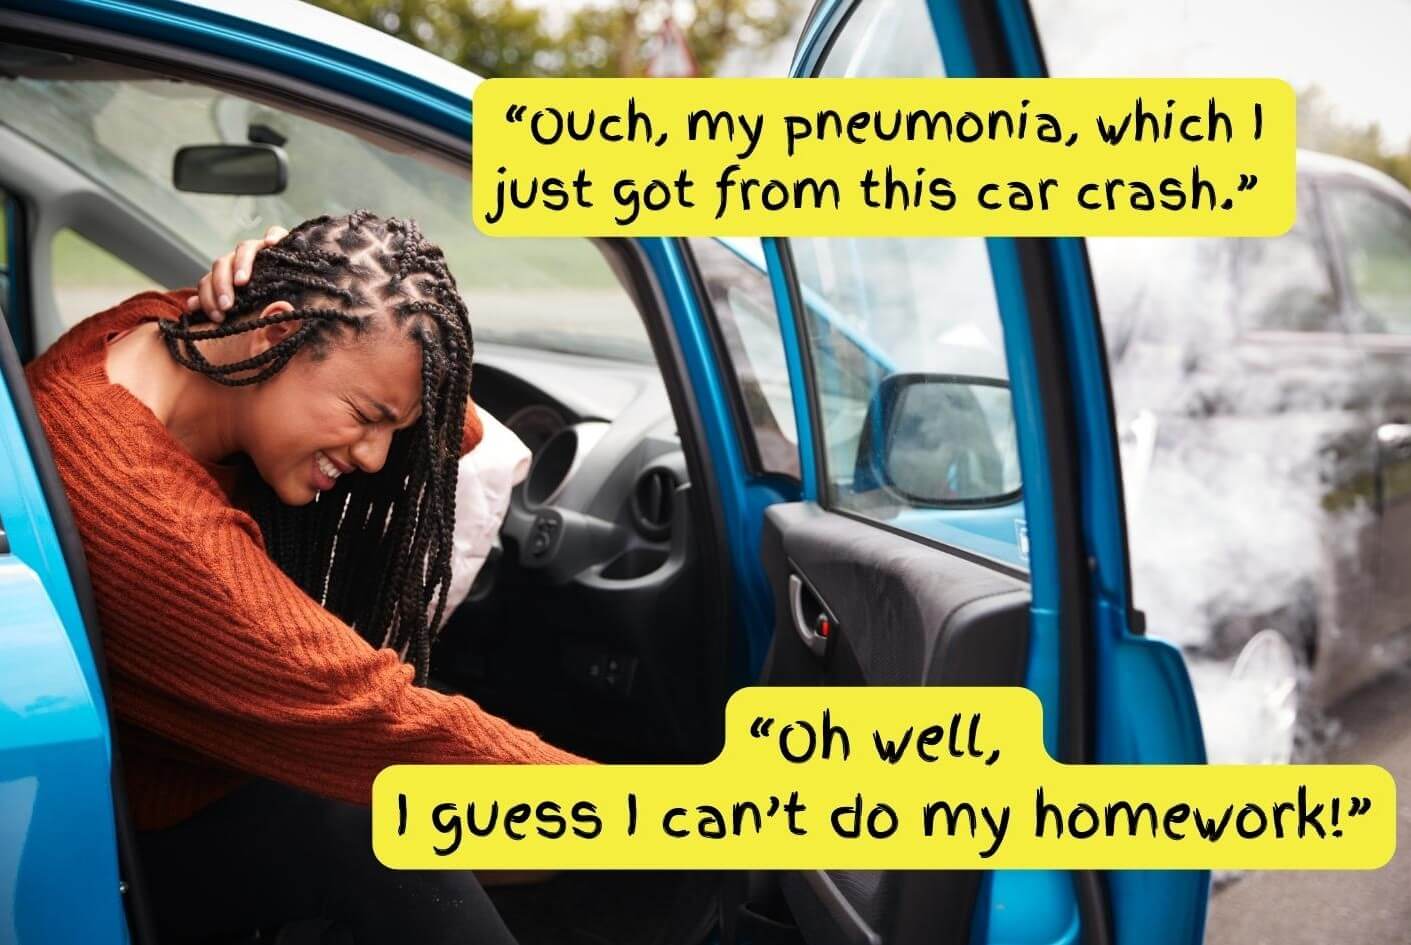 A student in a car crash uses the incident as a convenient excuse for not doing their homework.